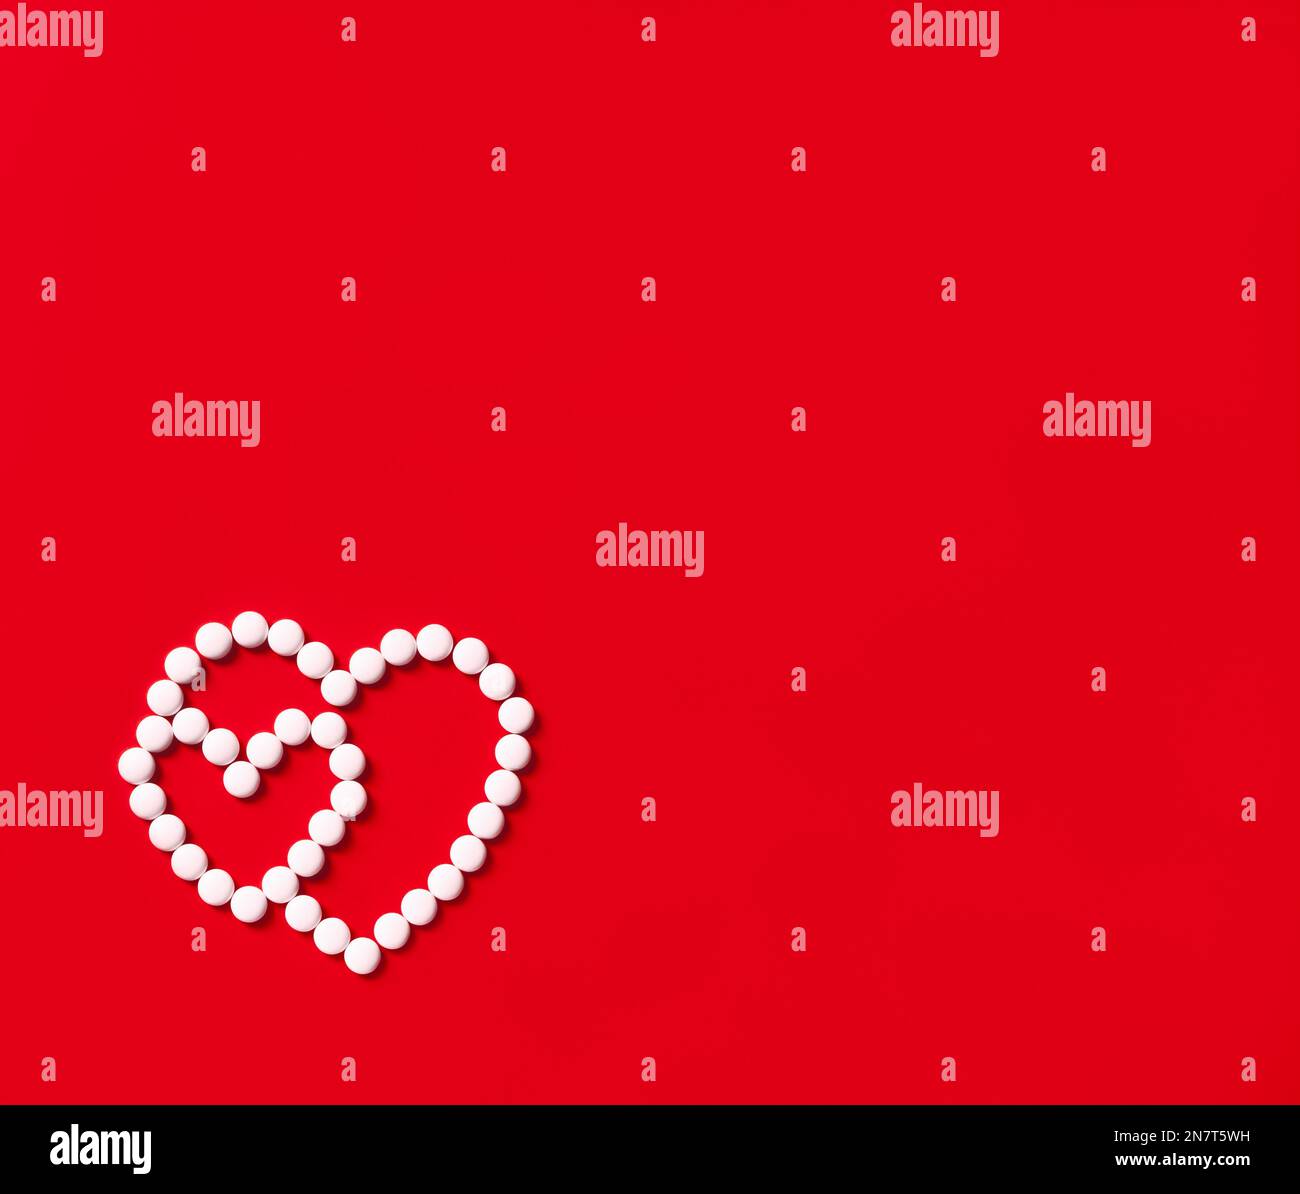 two hearts made of round white pills on a red background Stock Photo